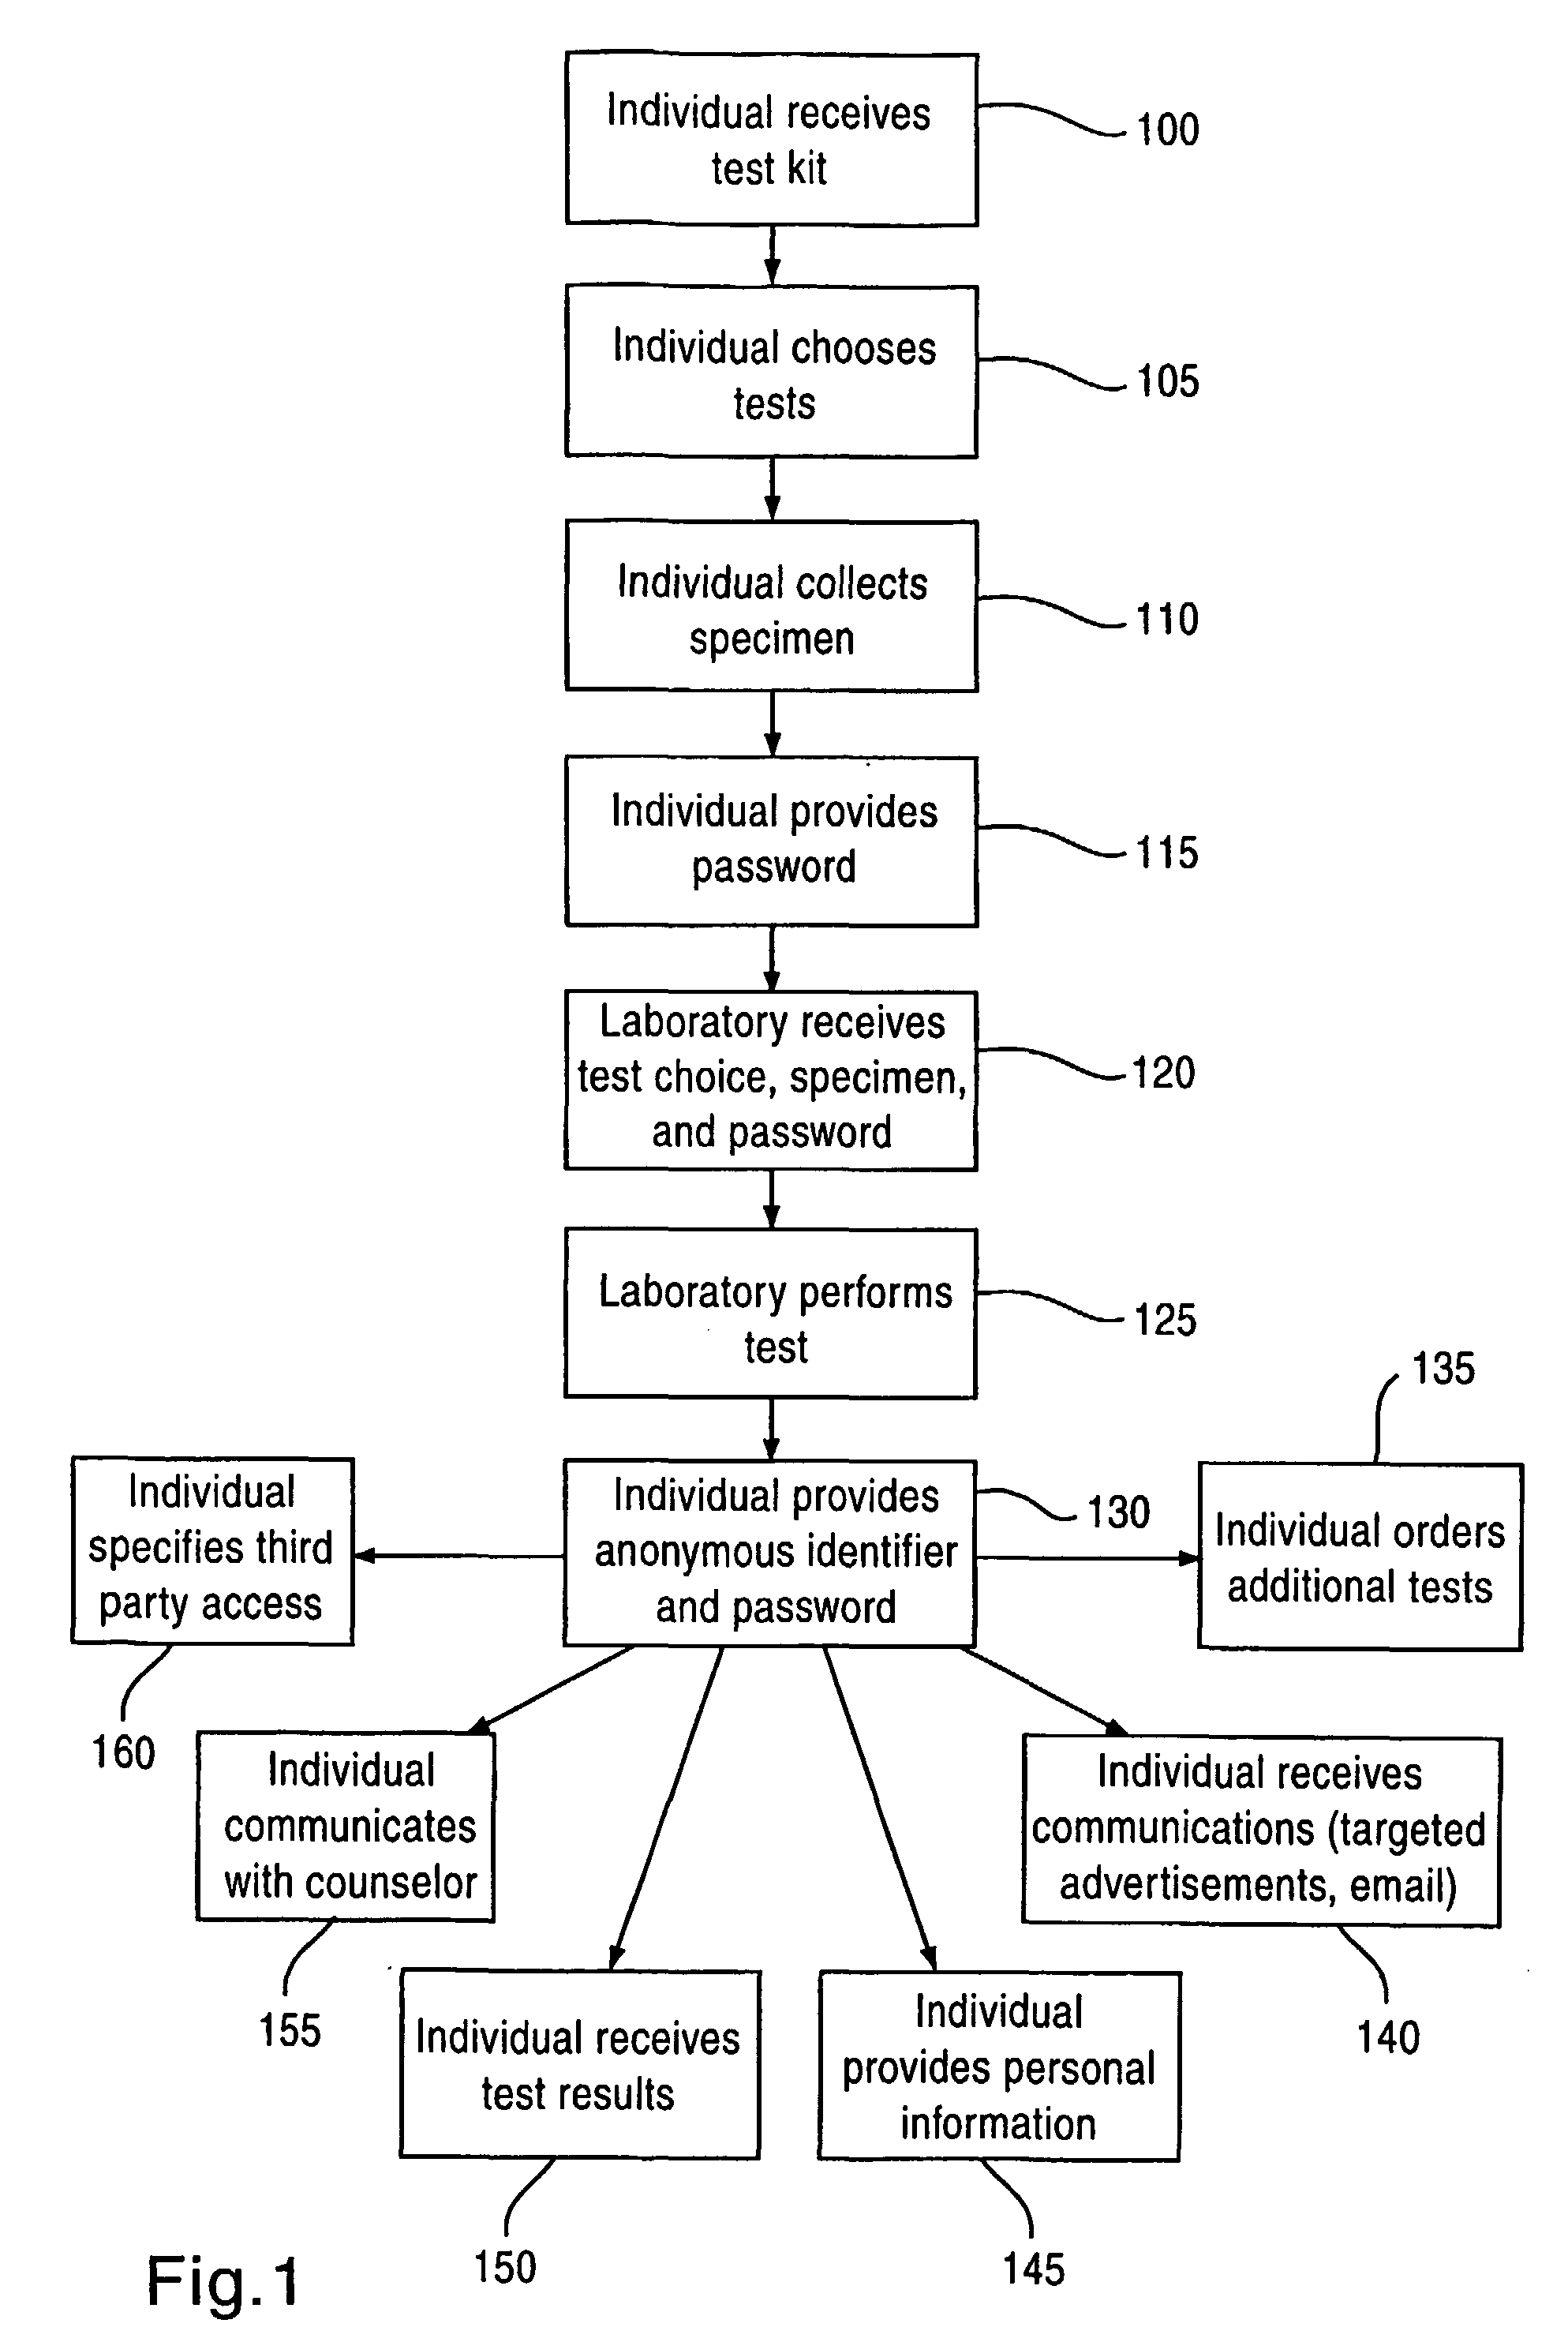 Method And System For Comprehensive Knowledge-Based Anonymous Testing And Reporting, And Providing Selective Access To Test Results And Report